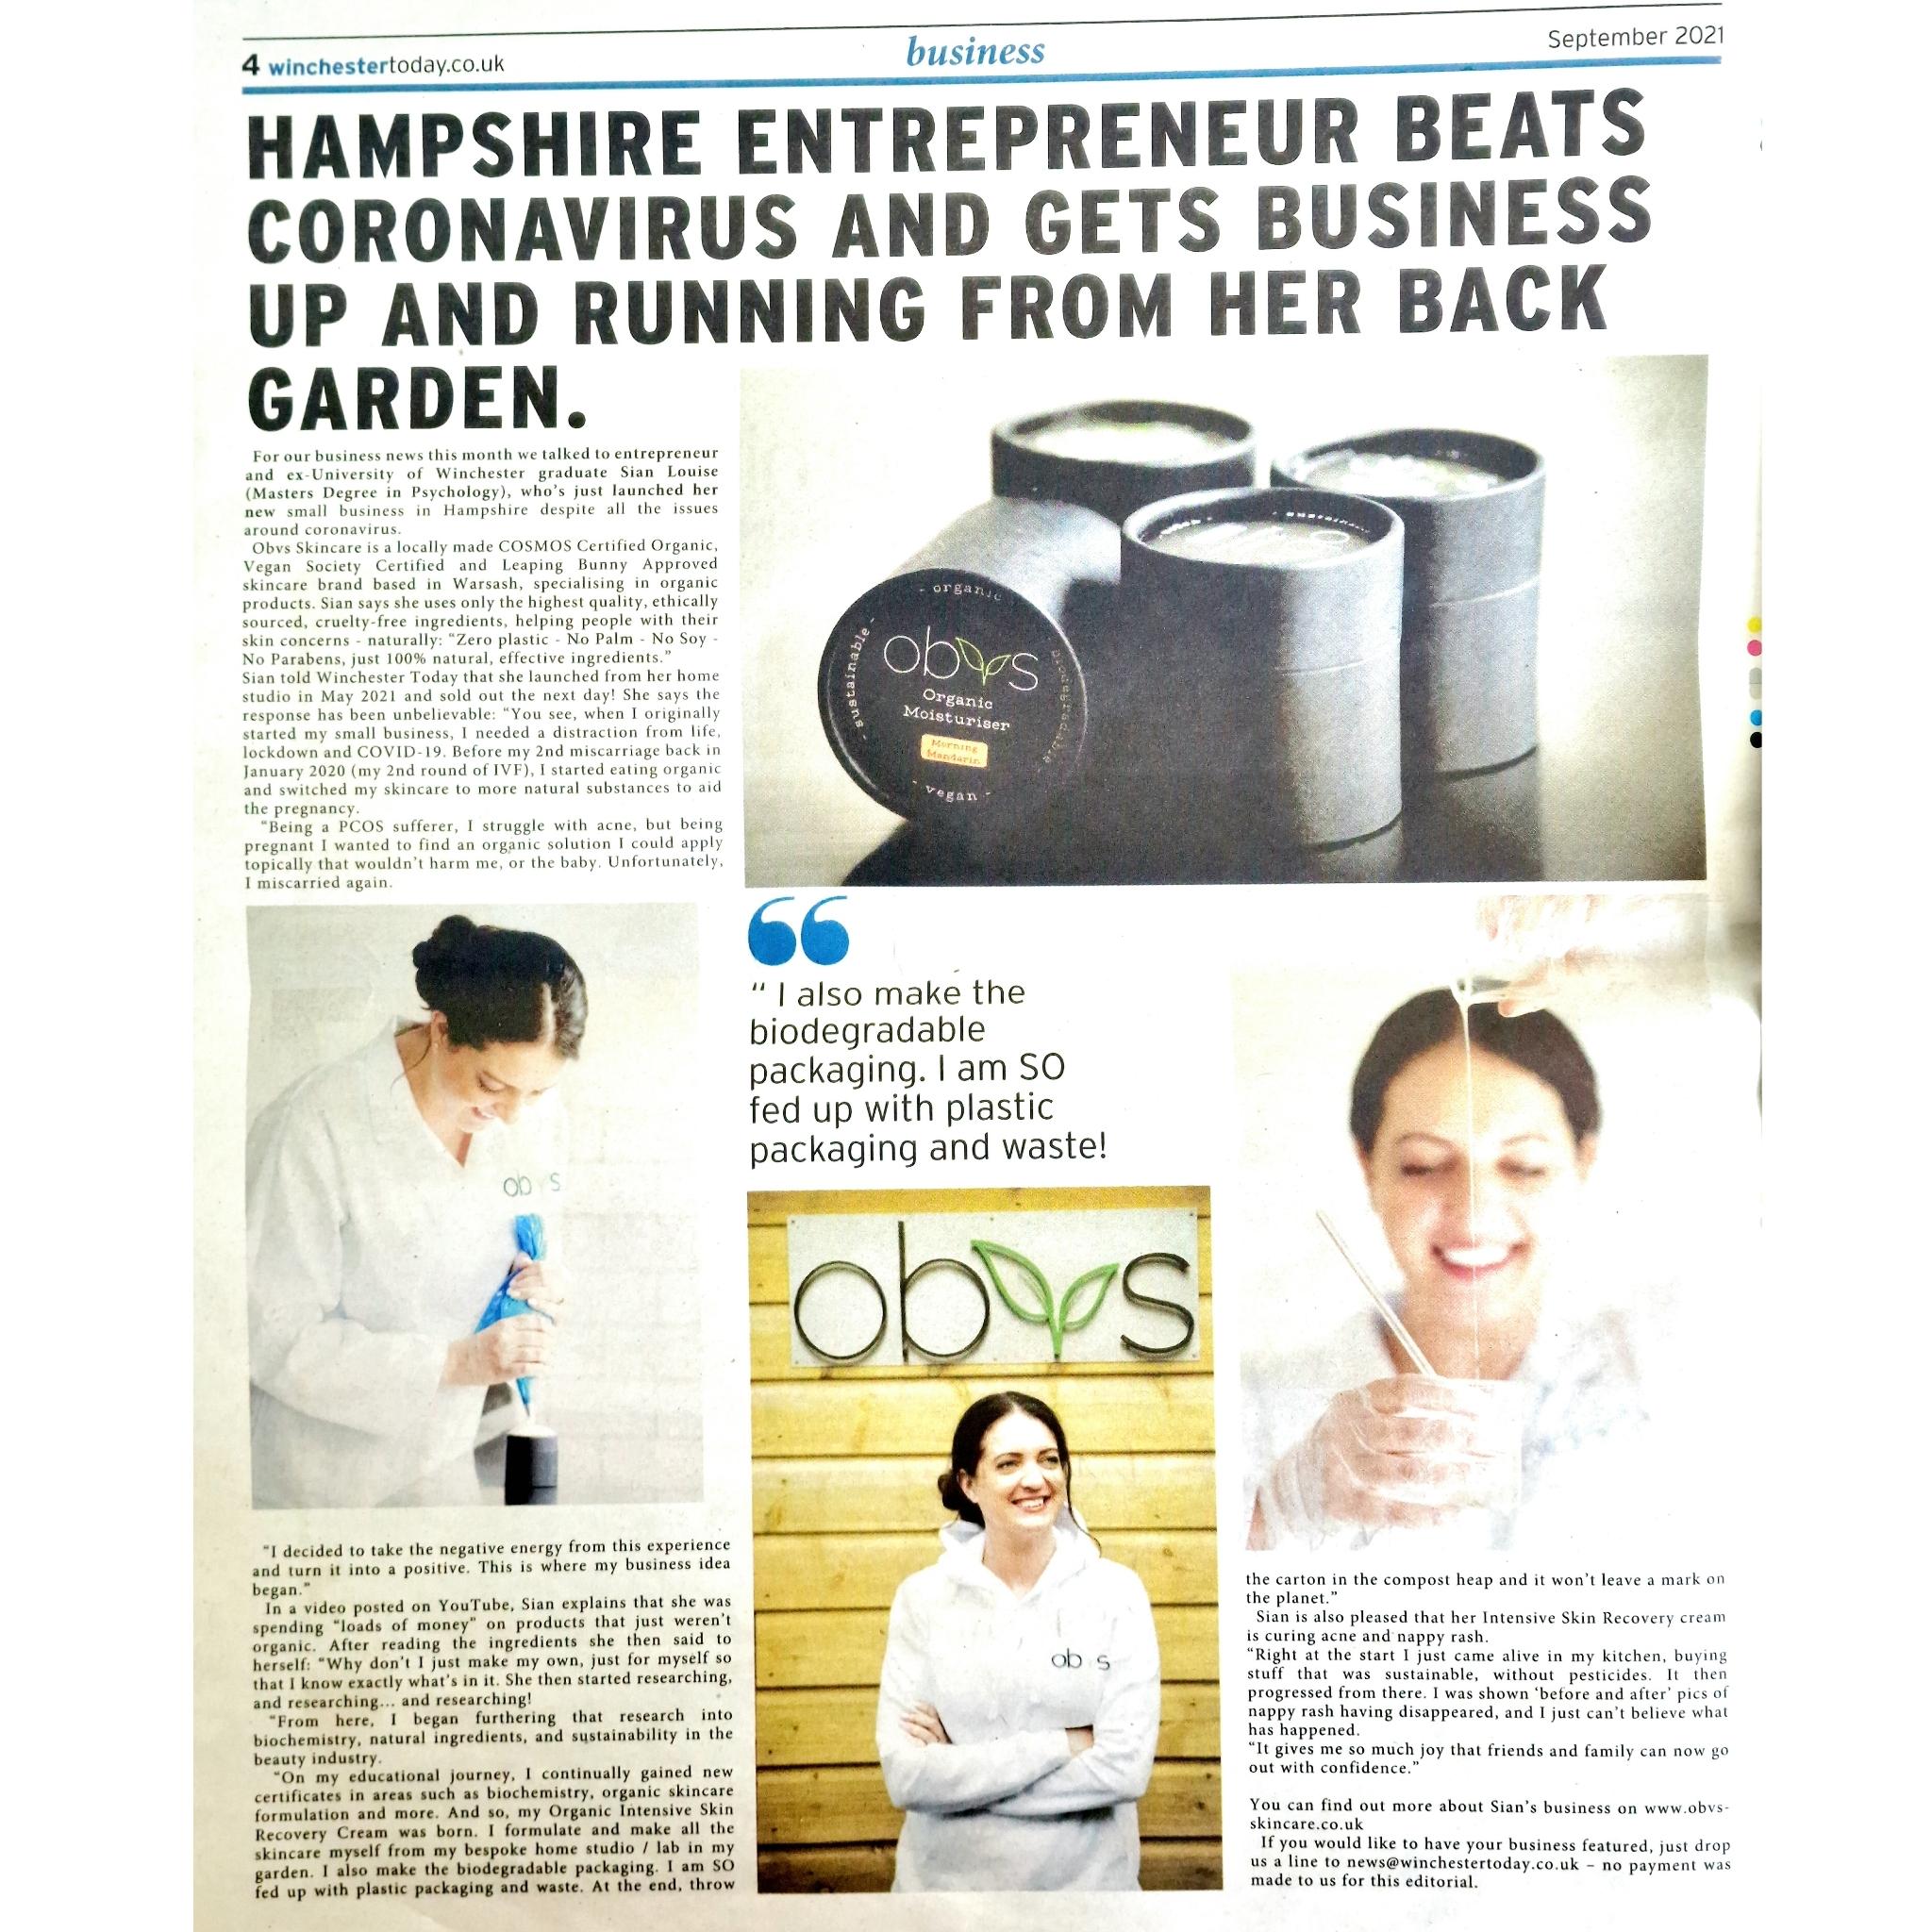 Hampshire Entrepreneur Beats Coronavirus And Gets Business Up And Running From Her Back Garden